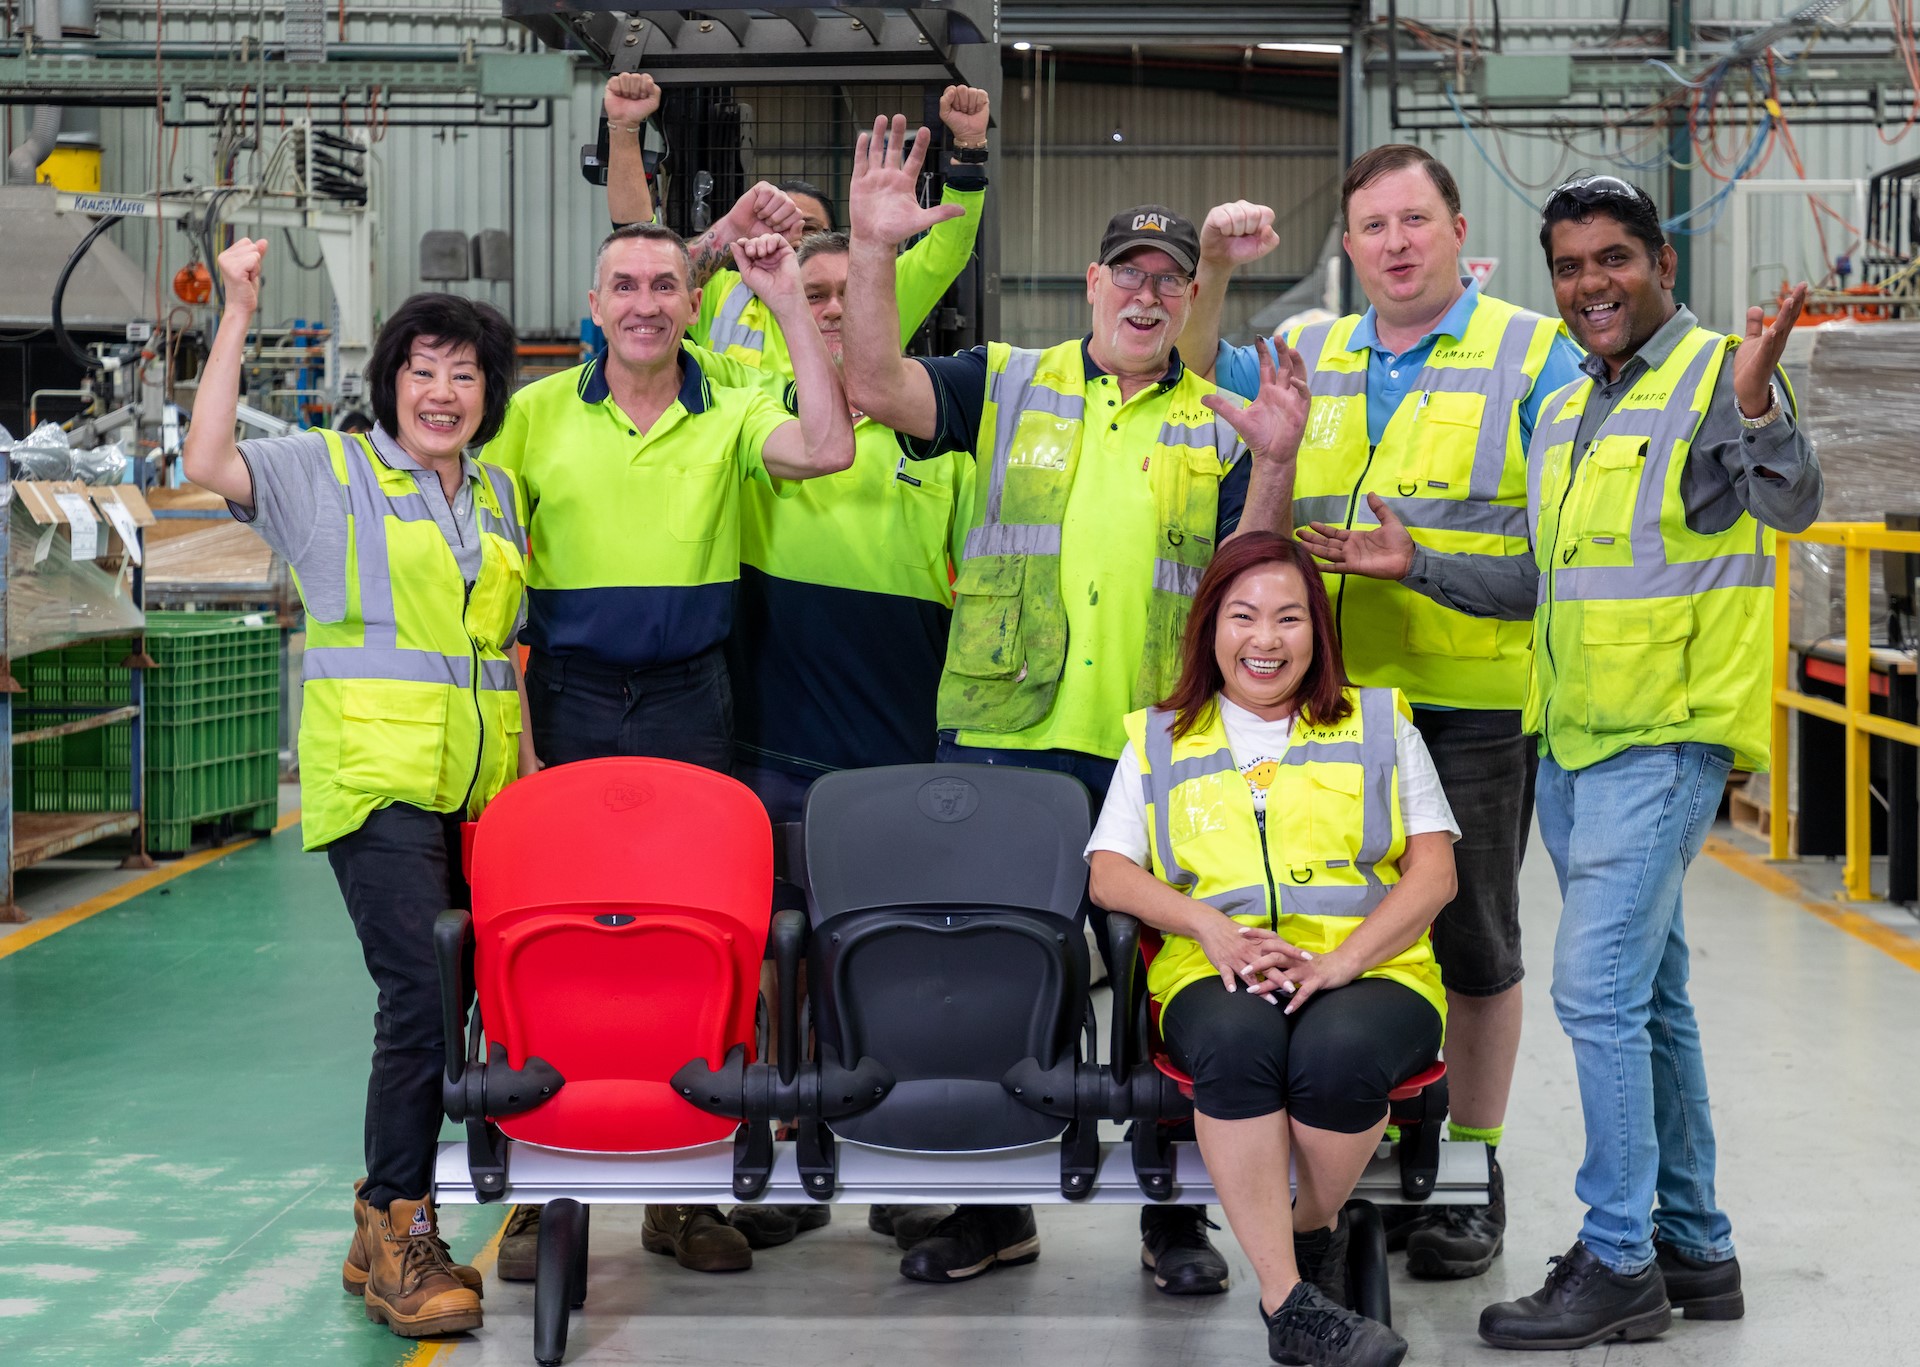 The Cematic Seating team stand in high vis gear around their products smiling with hands in the air cheering. One woman is seated at the front on one of Cematic's showcase seats.